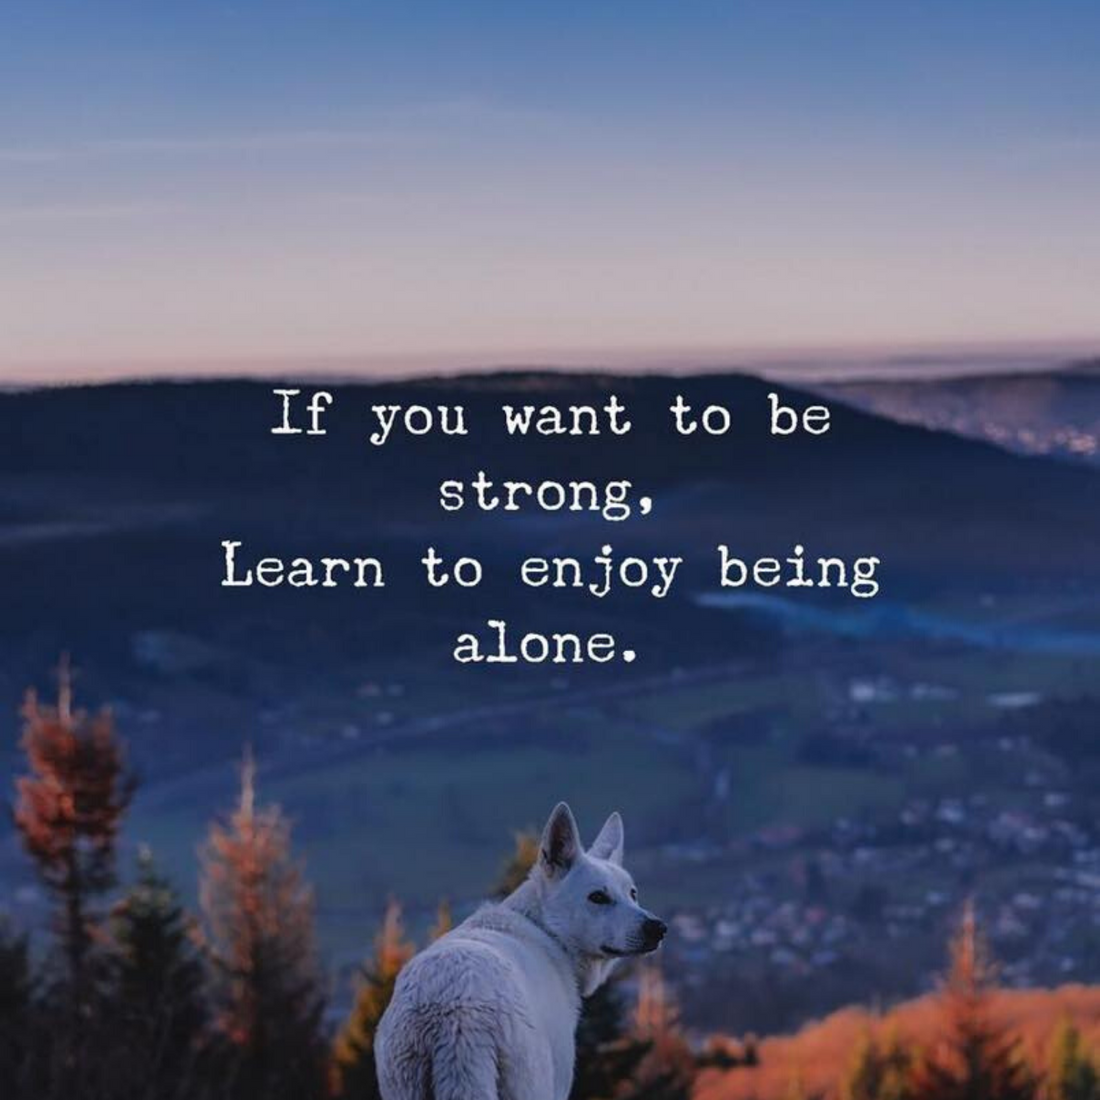 Being alone 💜🙏